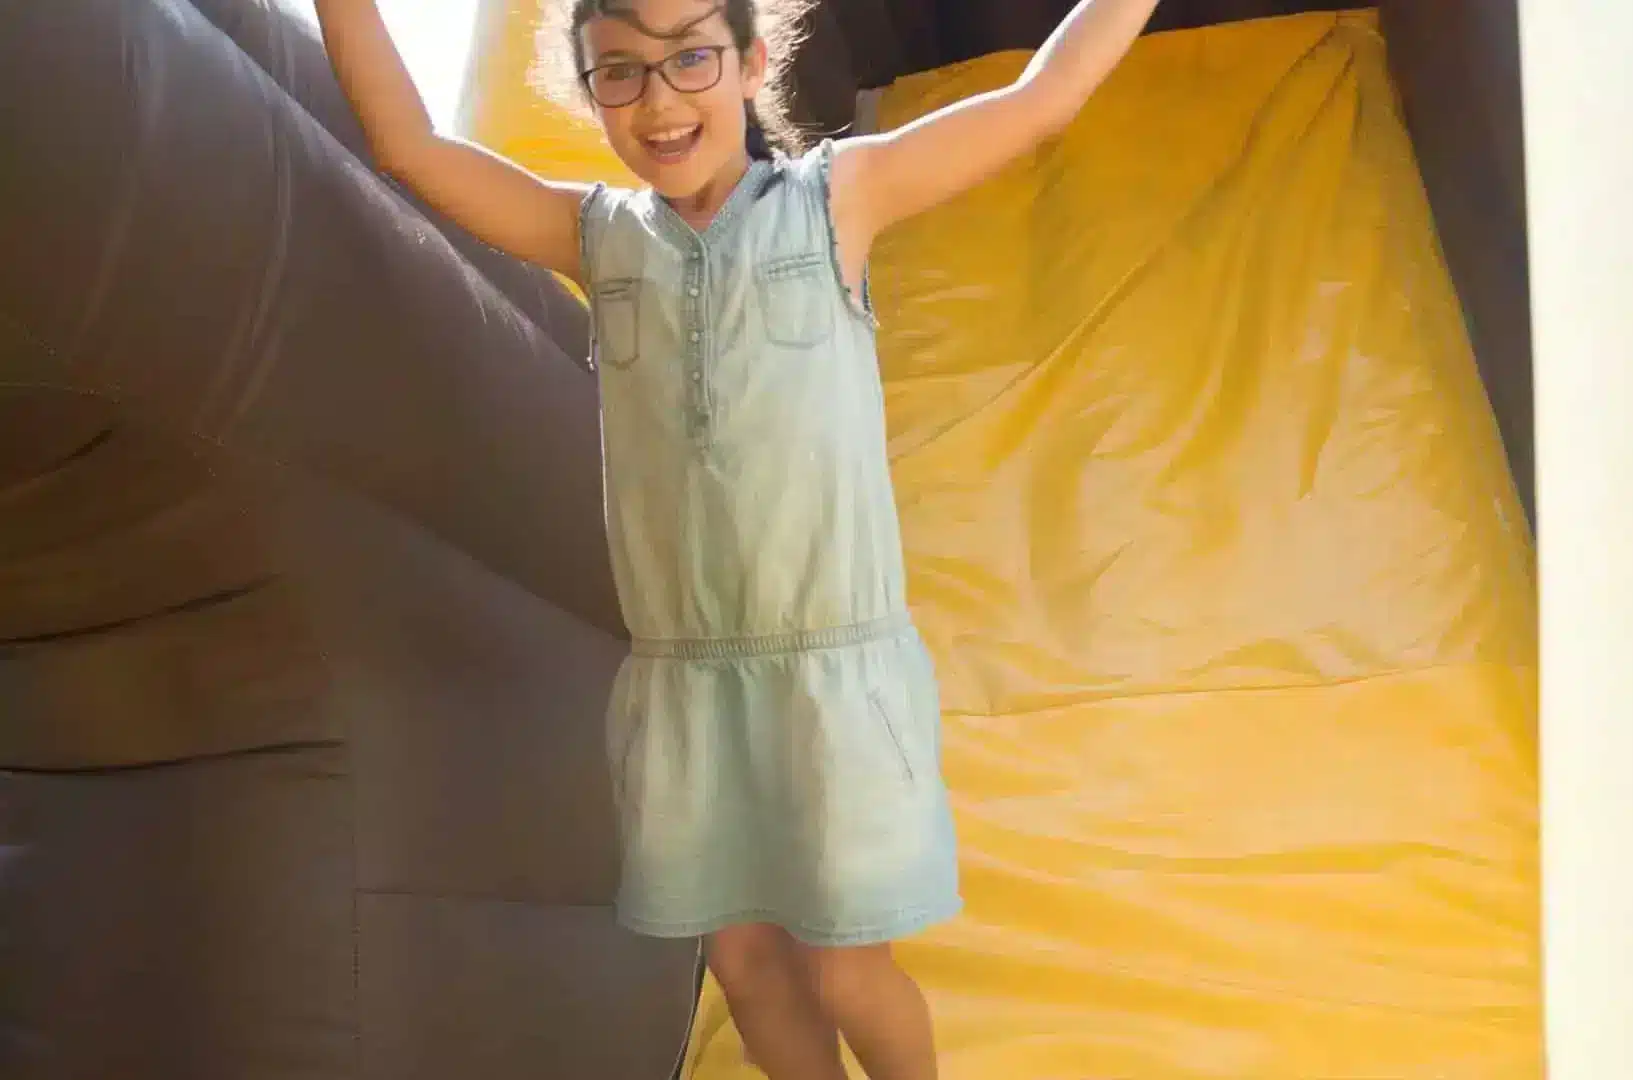 Child having fun in the campsite's inflatable structure